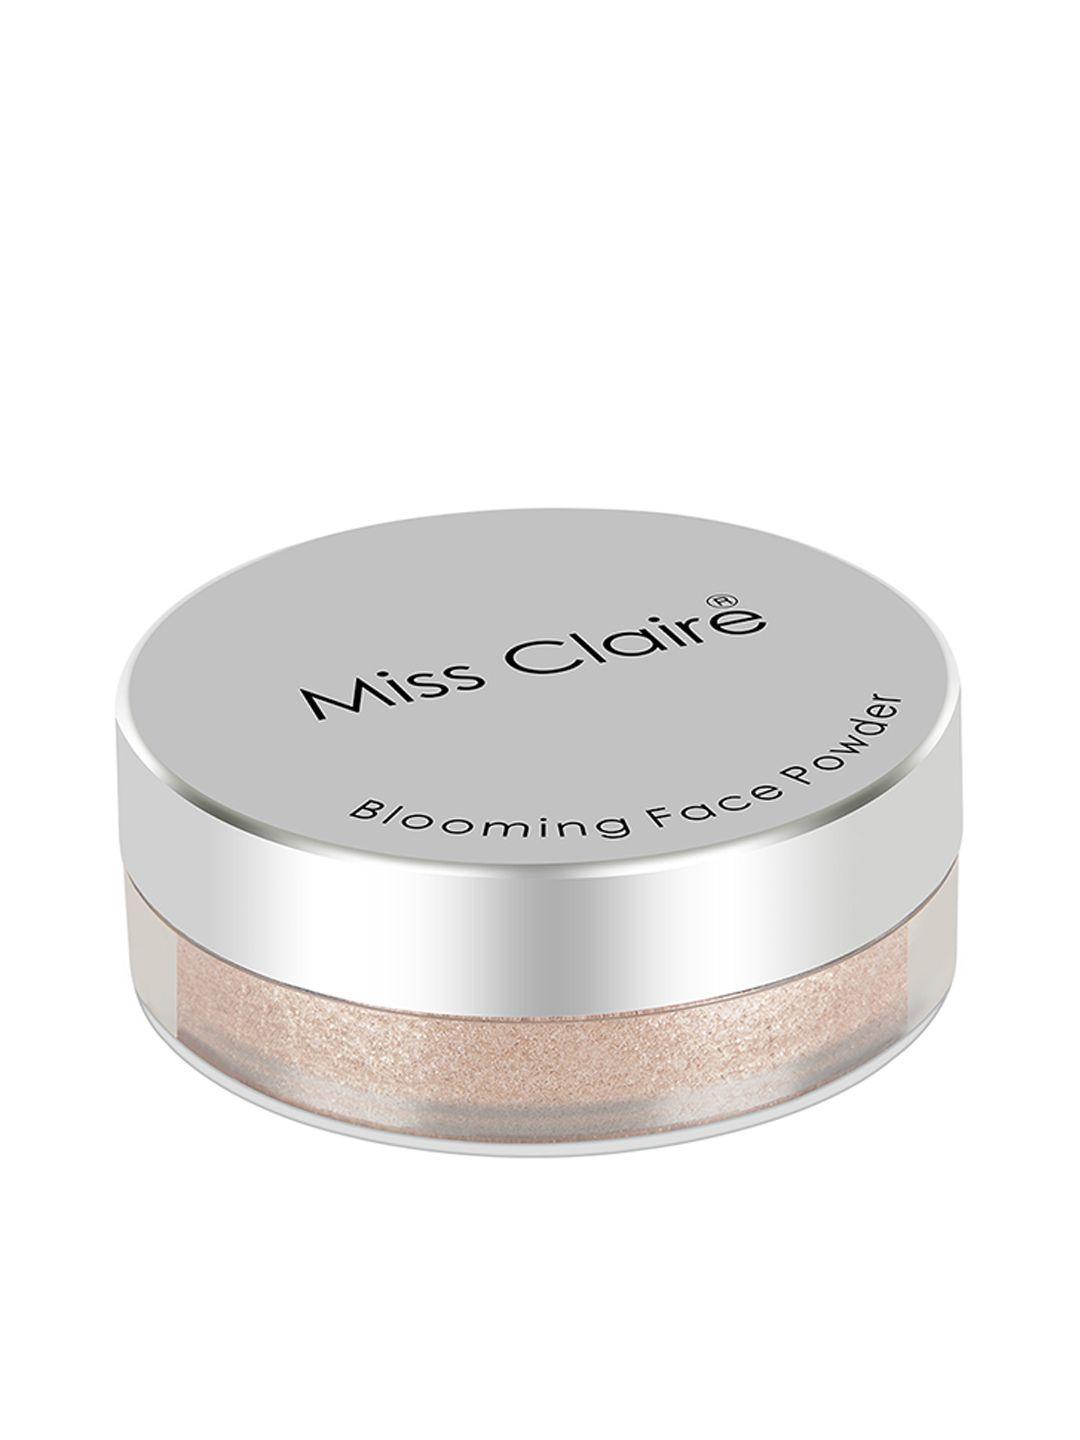 miss-claire-pearl-03-blooming-face-powder-7g